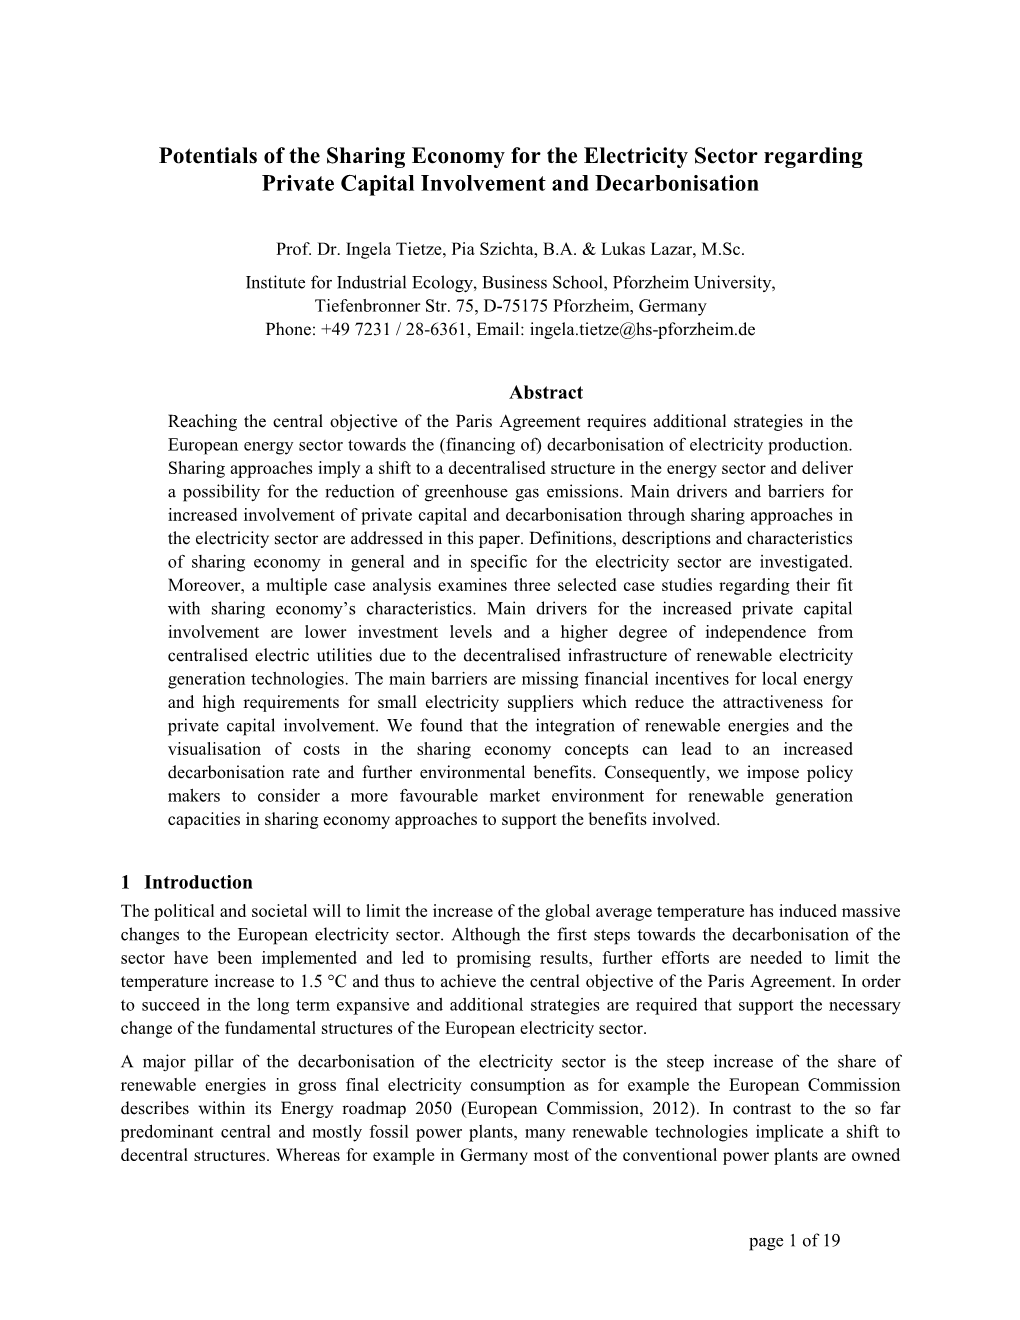 Potentials of the Sharing Economy for the Electricity Sector Regarding Private Capital Involvement and Decarbonisation